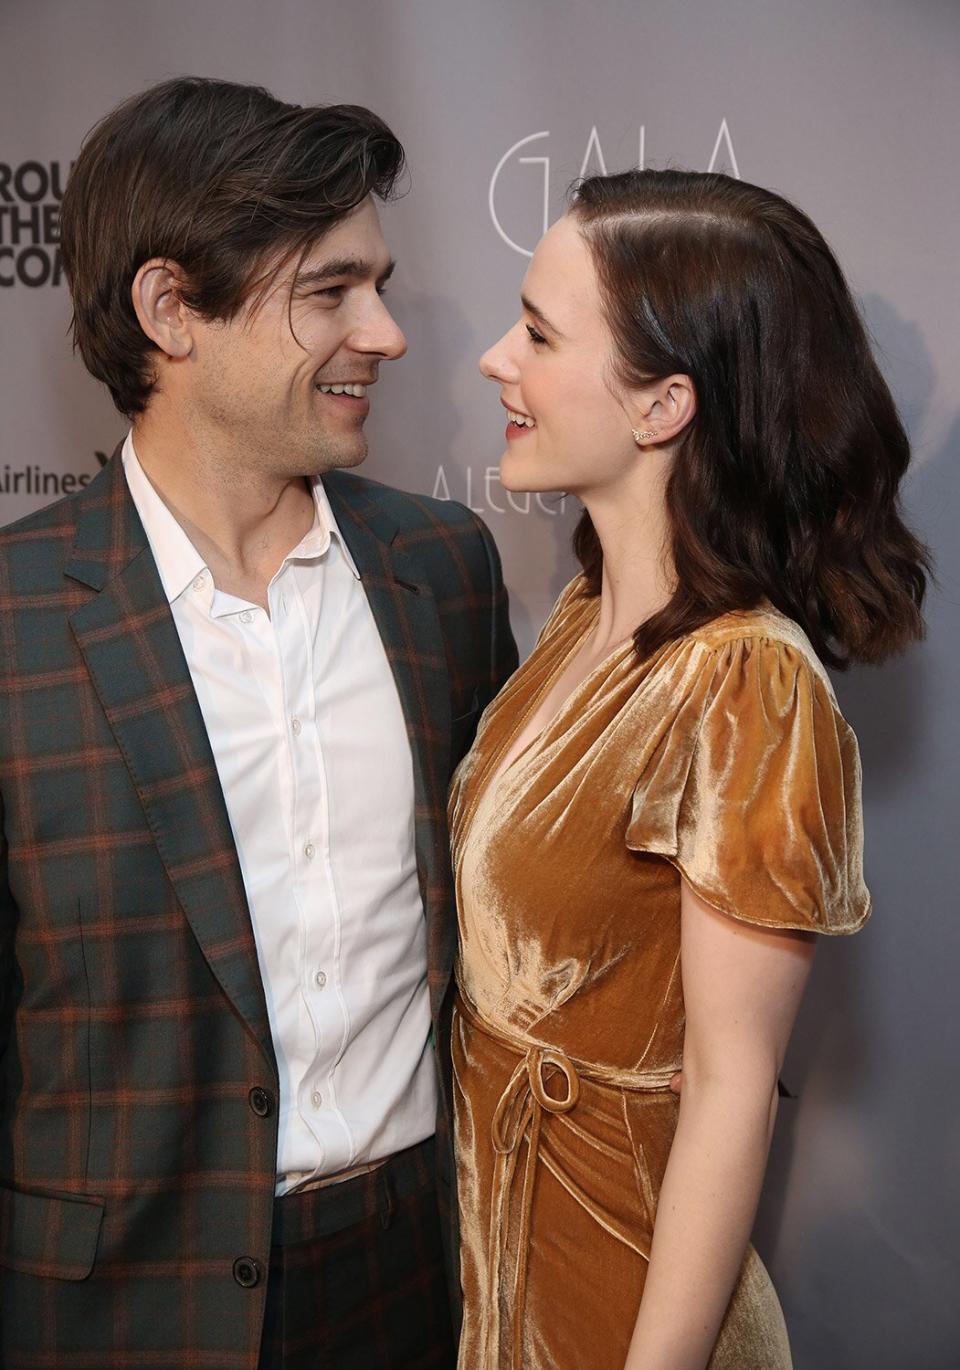 NEW YORK, NY - FEBRUARY 26: Jason Ralph and Rachel Brosnahan attends the Roundabout Theatre Company's 2018 Gala "A Legendary Night" on February 26, 2018 at the The Ziegfeld Ballroom in New York City. (Photo by Walter McBride/WireImage)